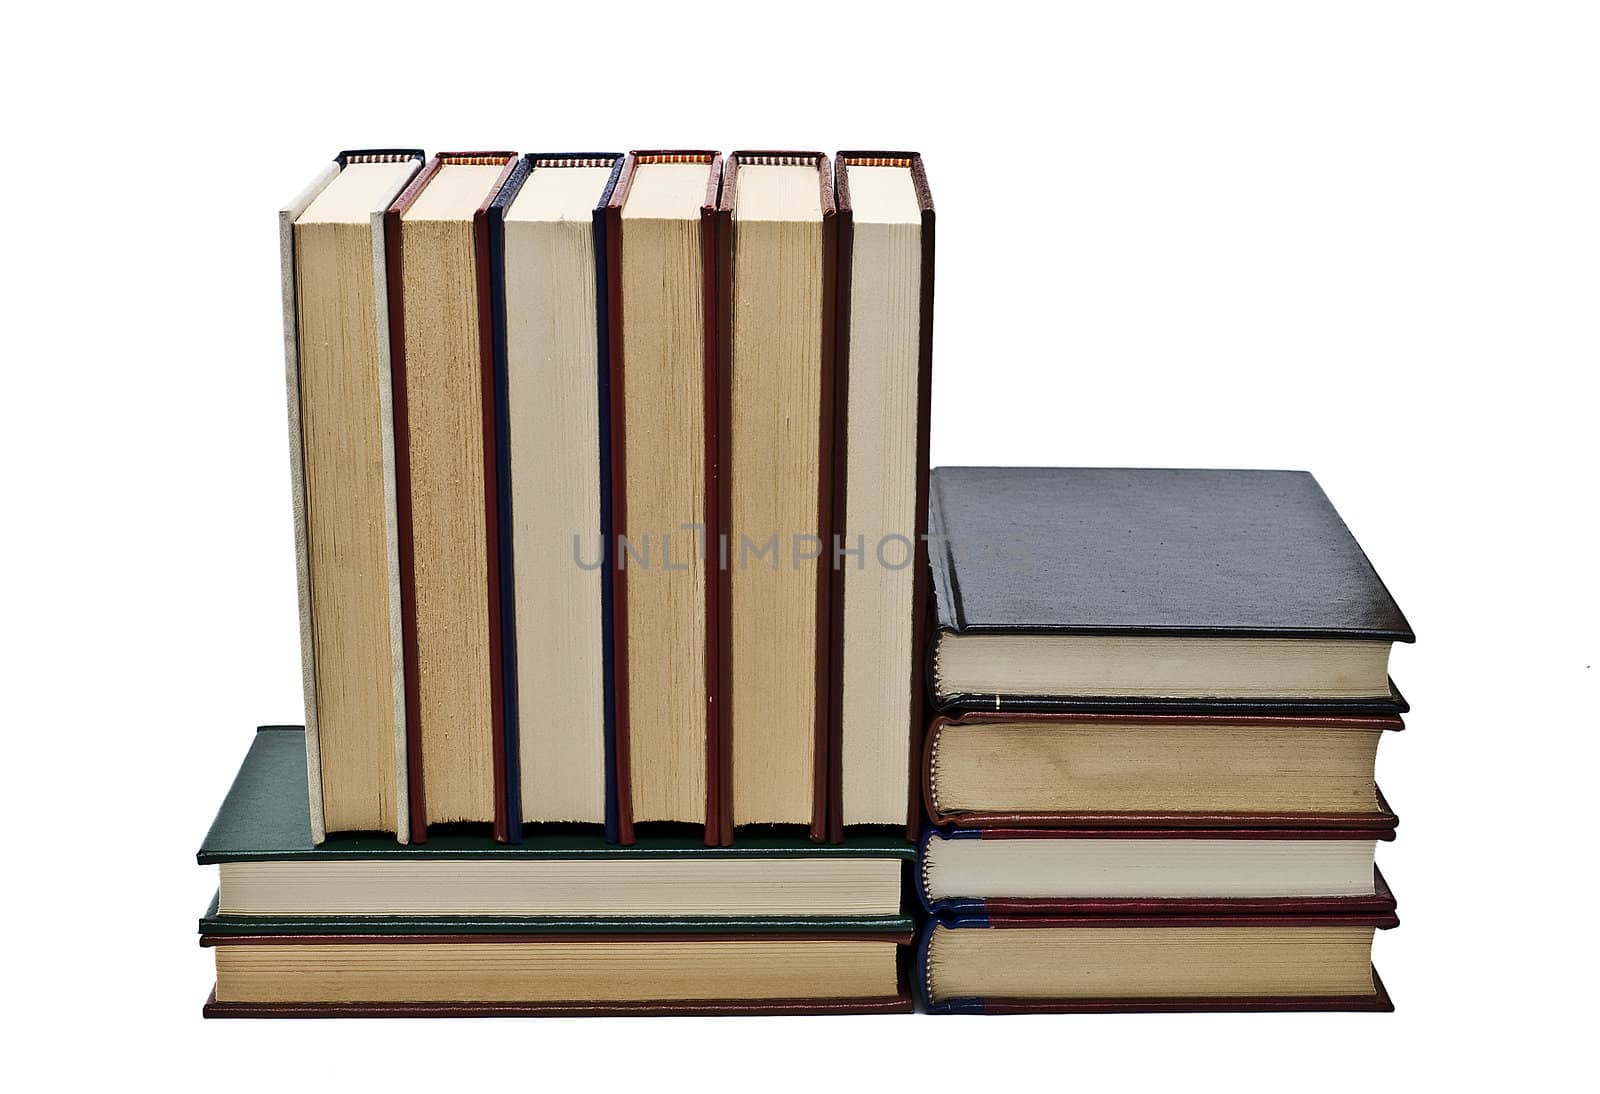 Some old books isolated on white background.